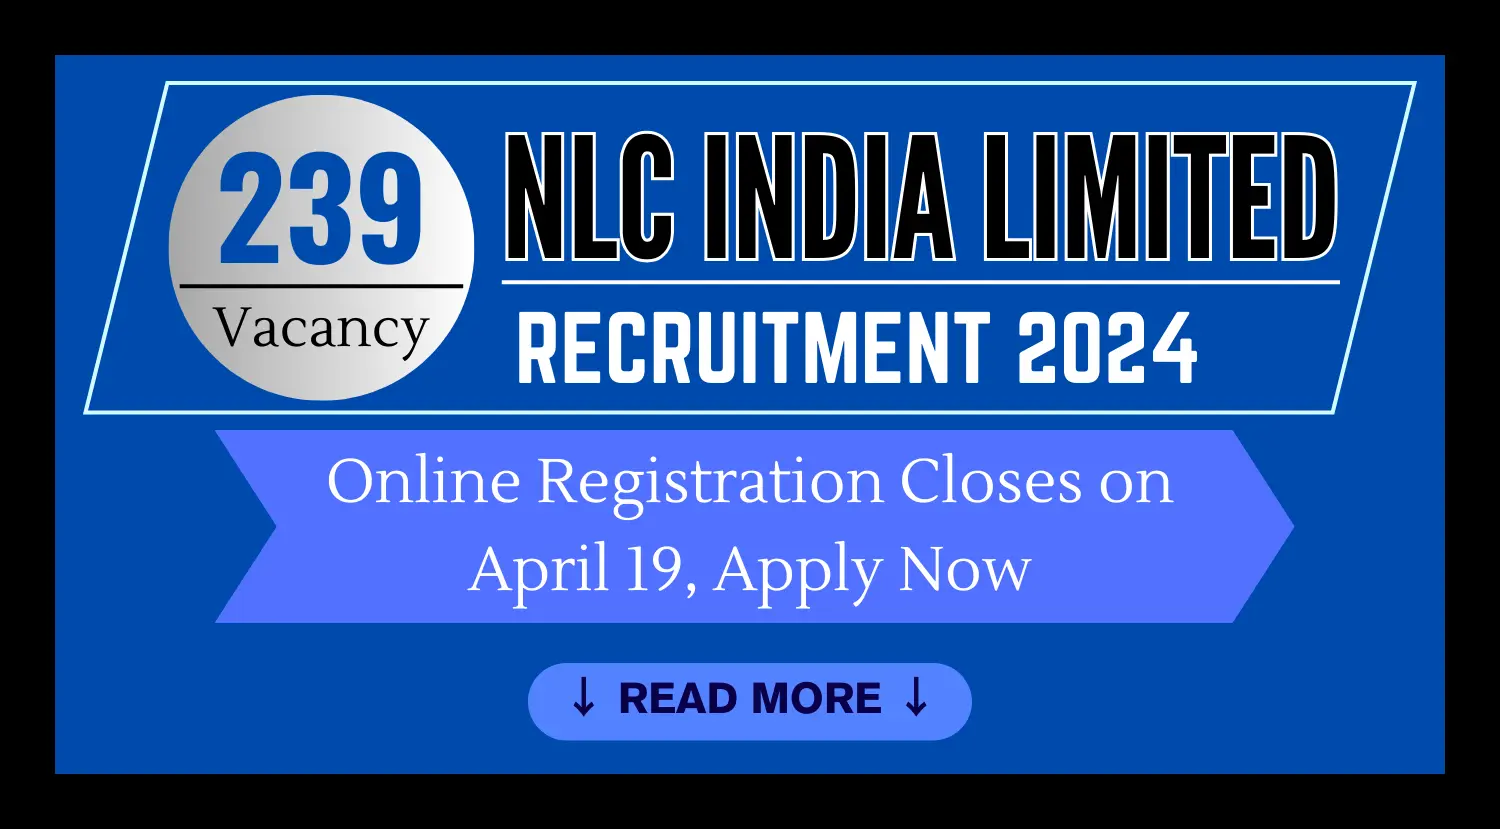 NLC India Ltd 239 Vacancy 2024 Online Registration Closes on April 19 Apply Now